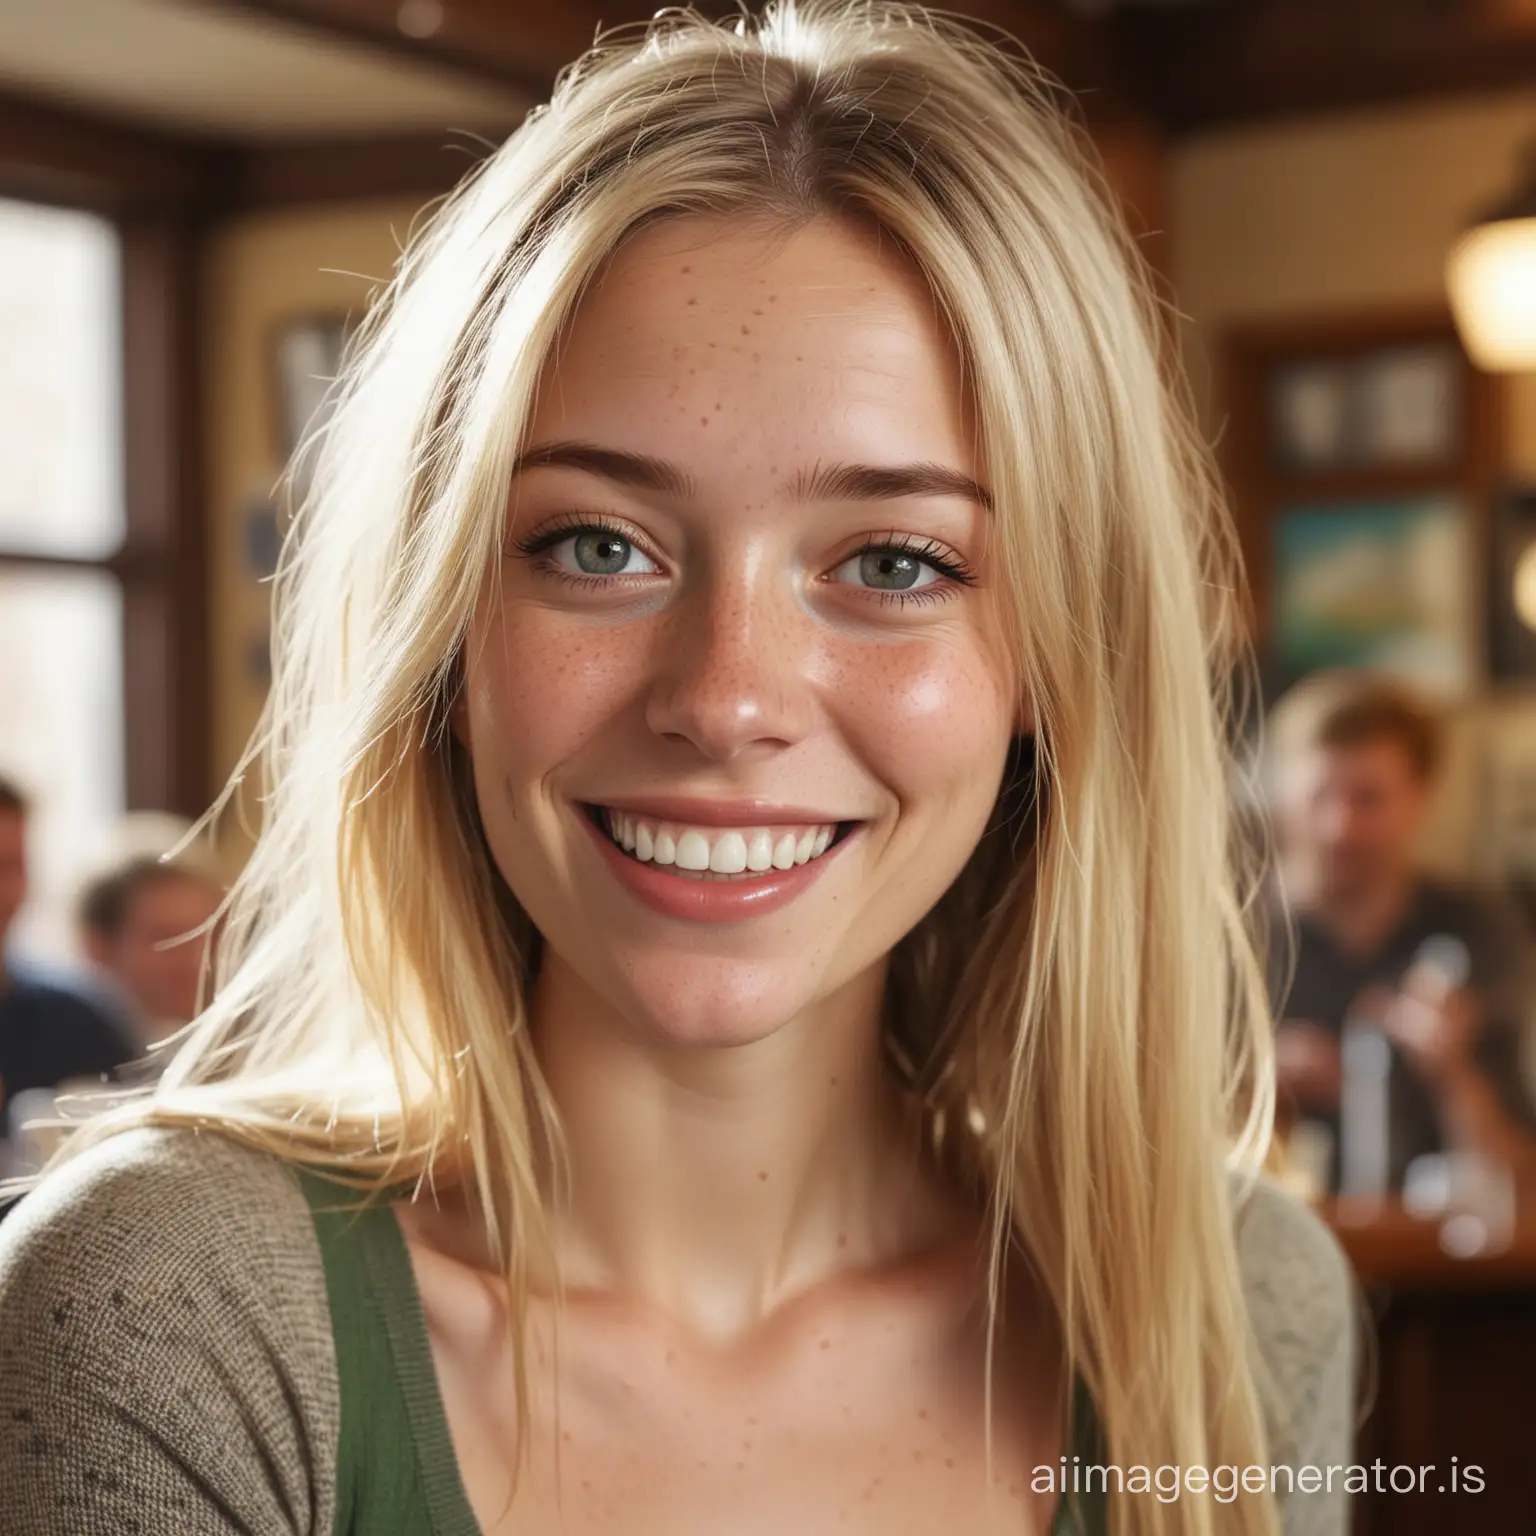 Smiling-Blonde-Woman-with-Freckles-in-Irish-Pub-Depth